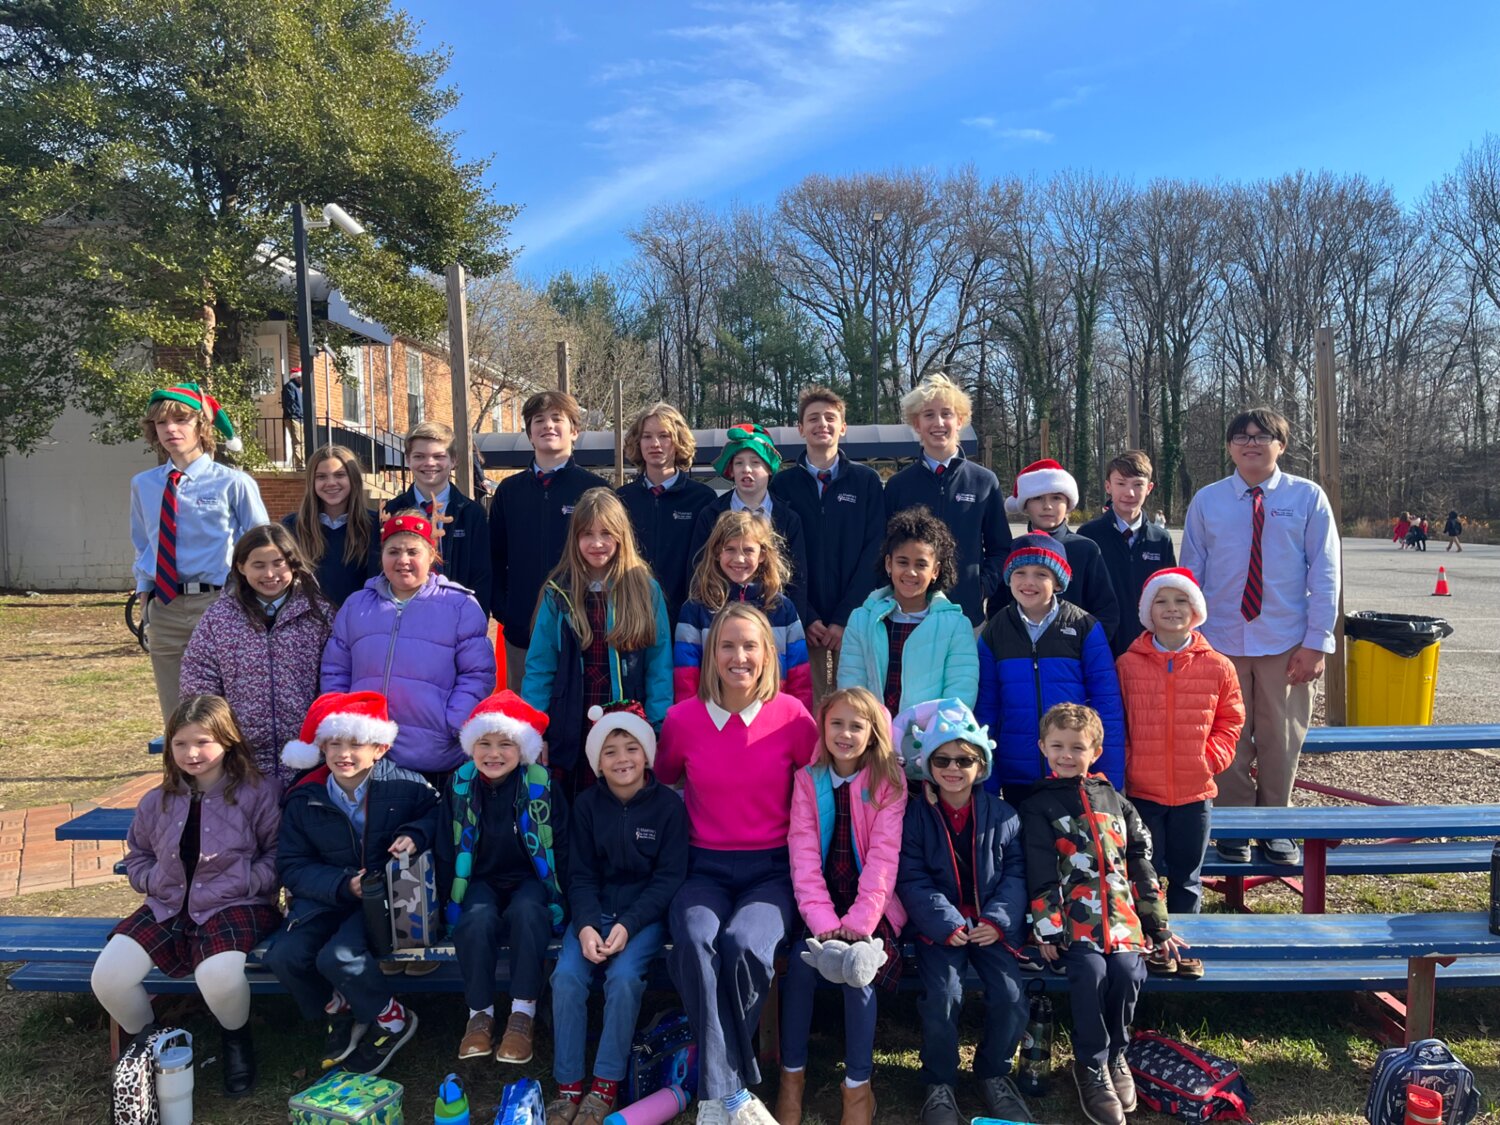 St. Martin’s-in-the-field Episcopal School learning support coordinator Kelcey Wohlgemuth (bottom row, center) posed with her students, ages 6 to 13.